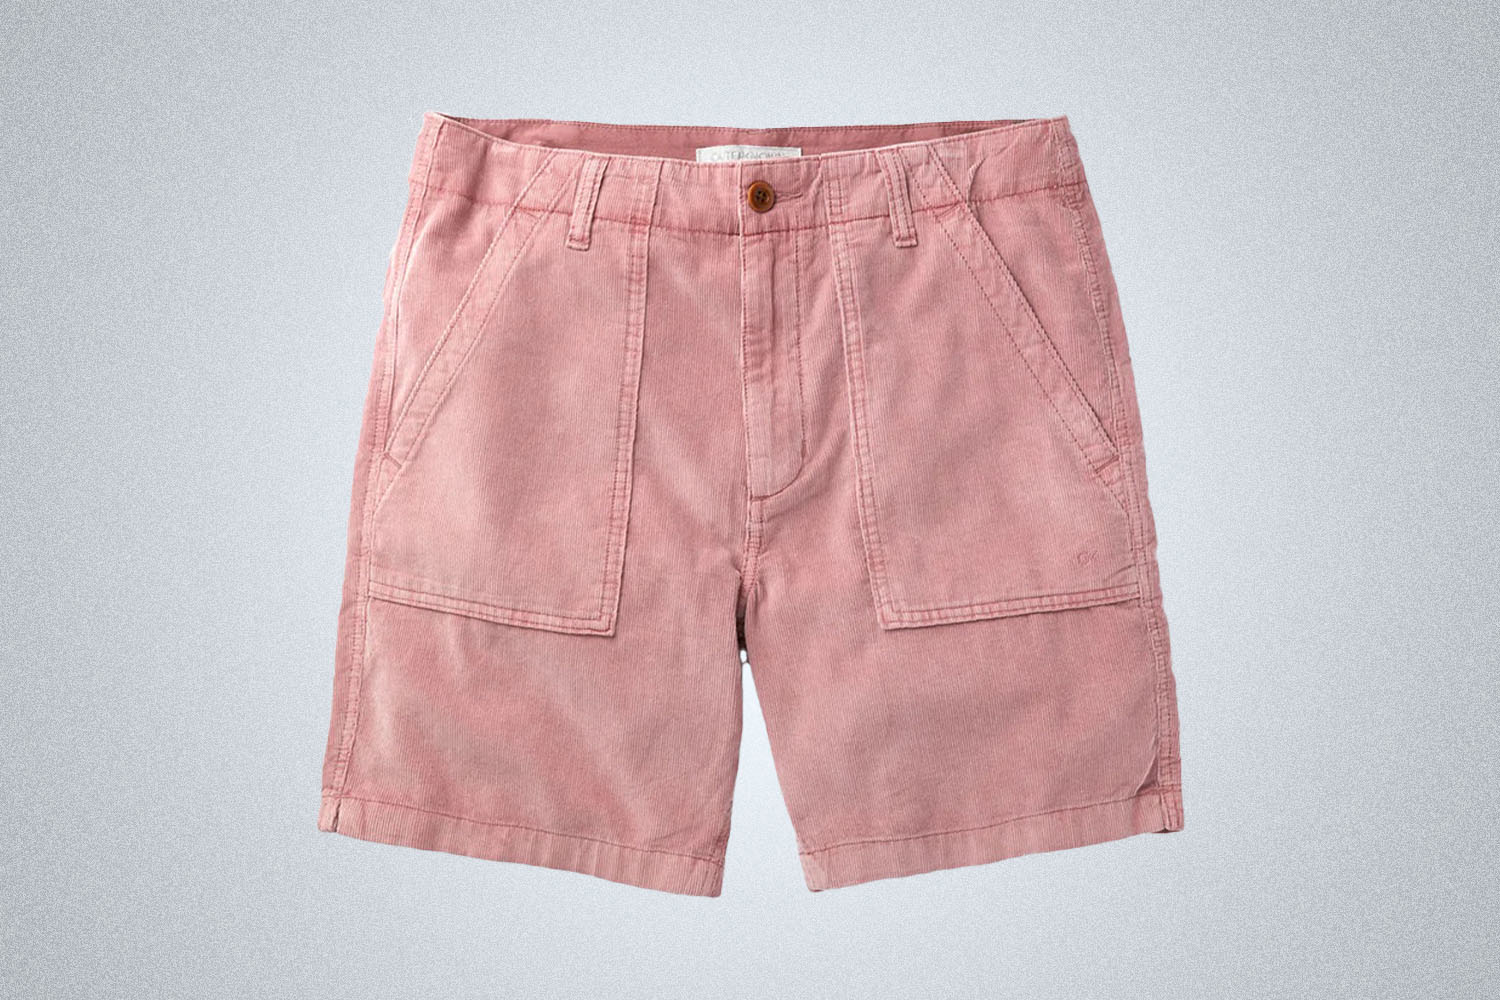 a pair of pink Outerknown corduroy shorts on a grey background